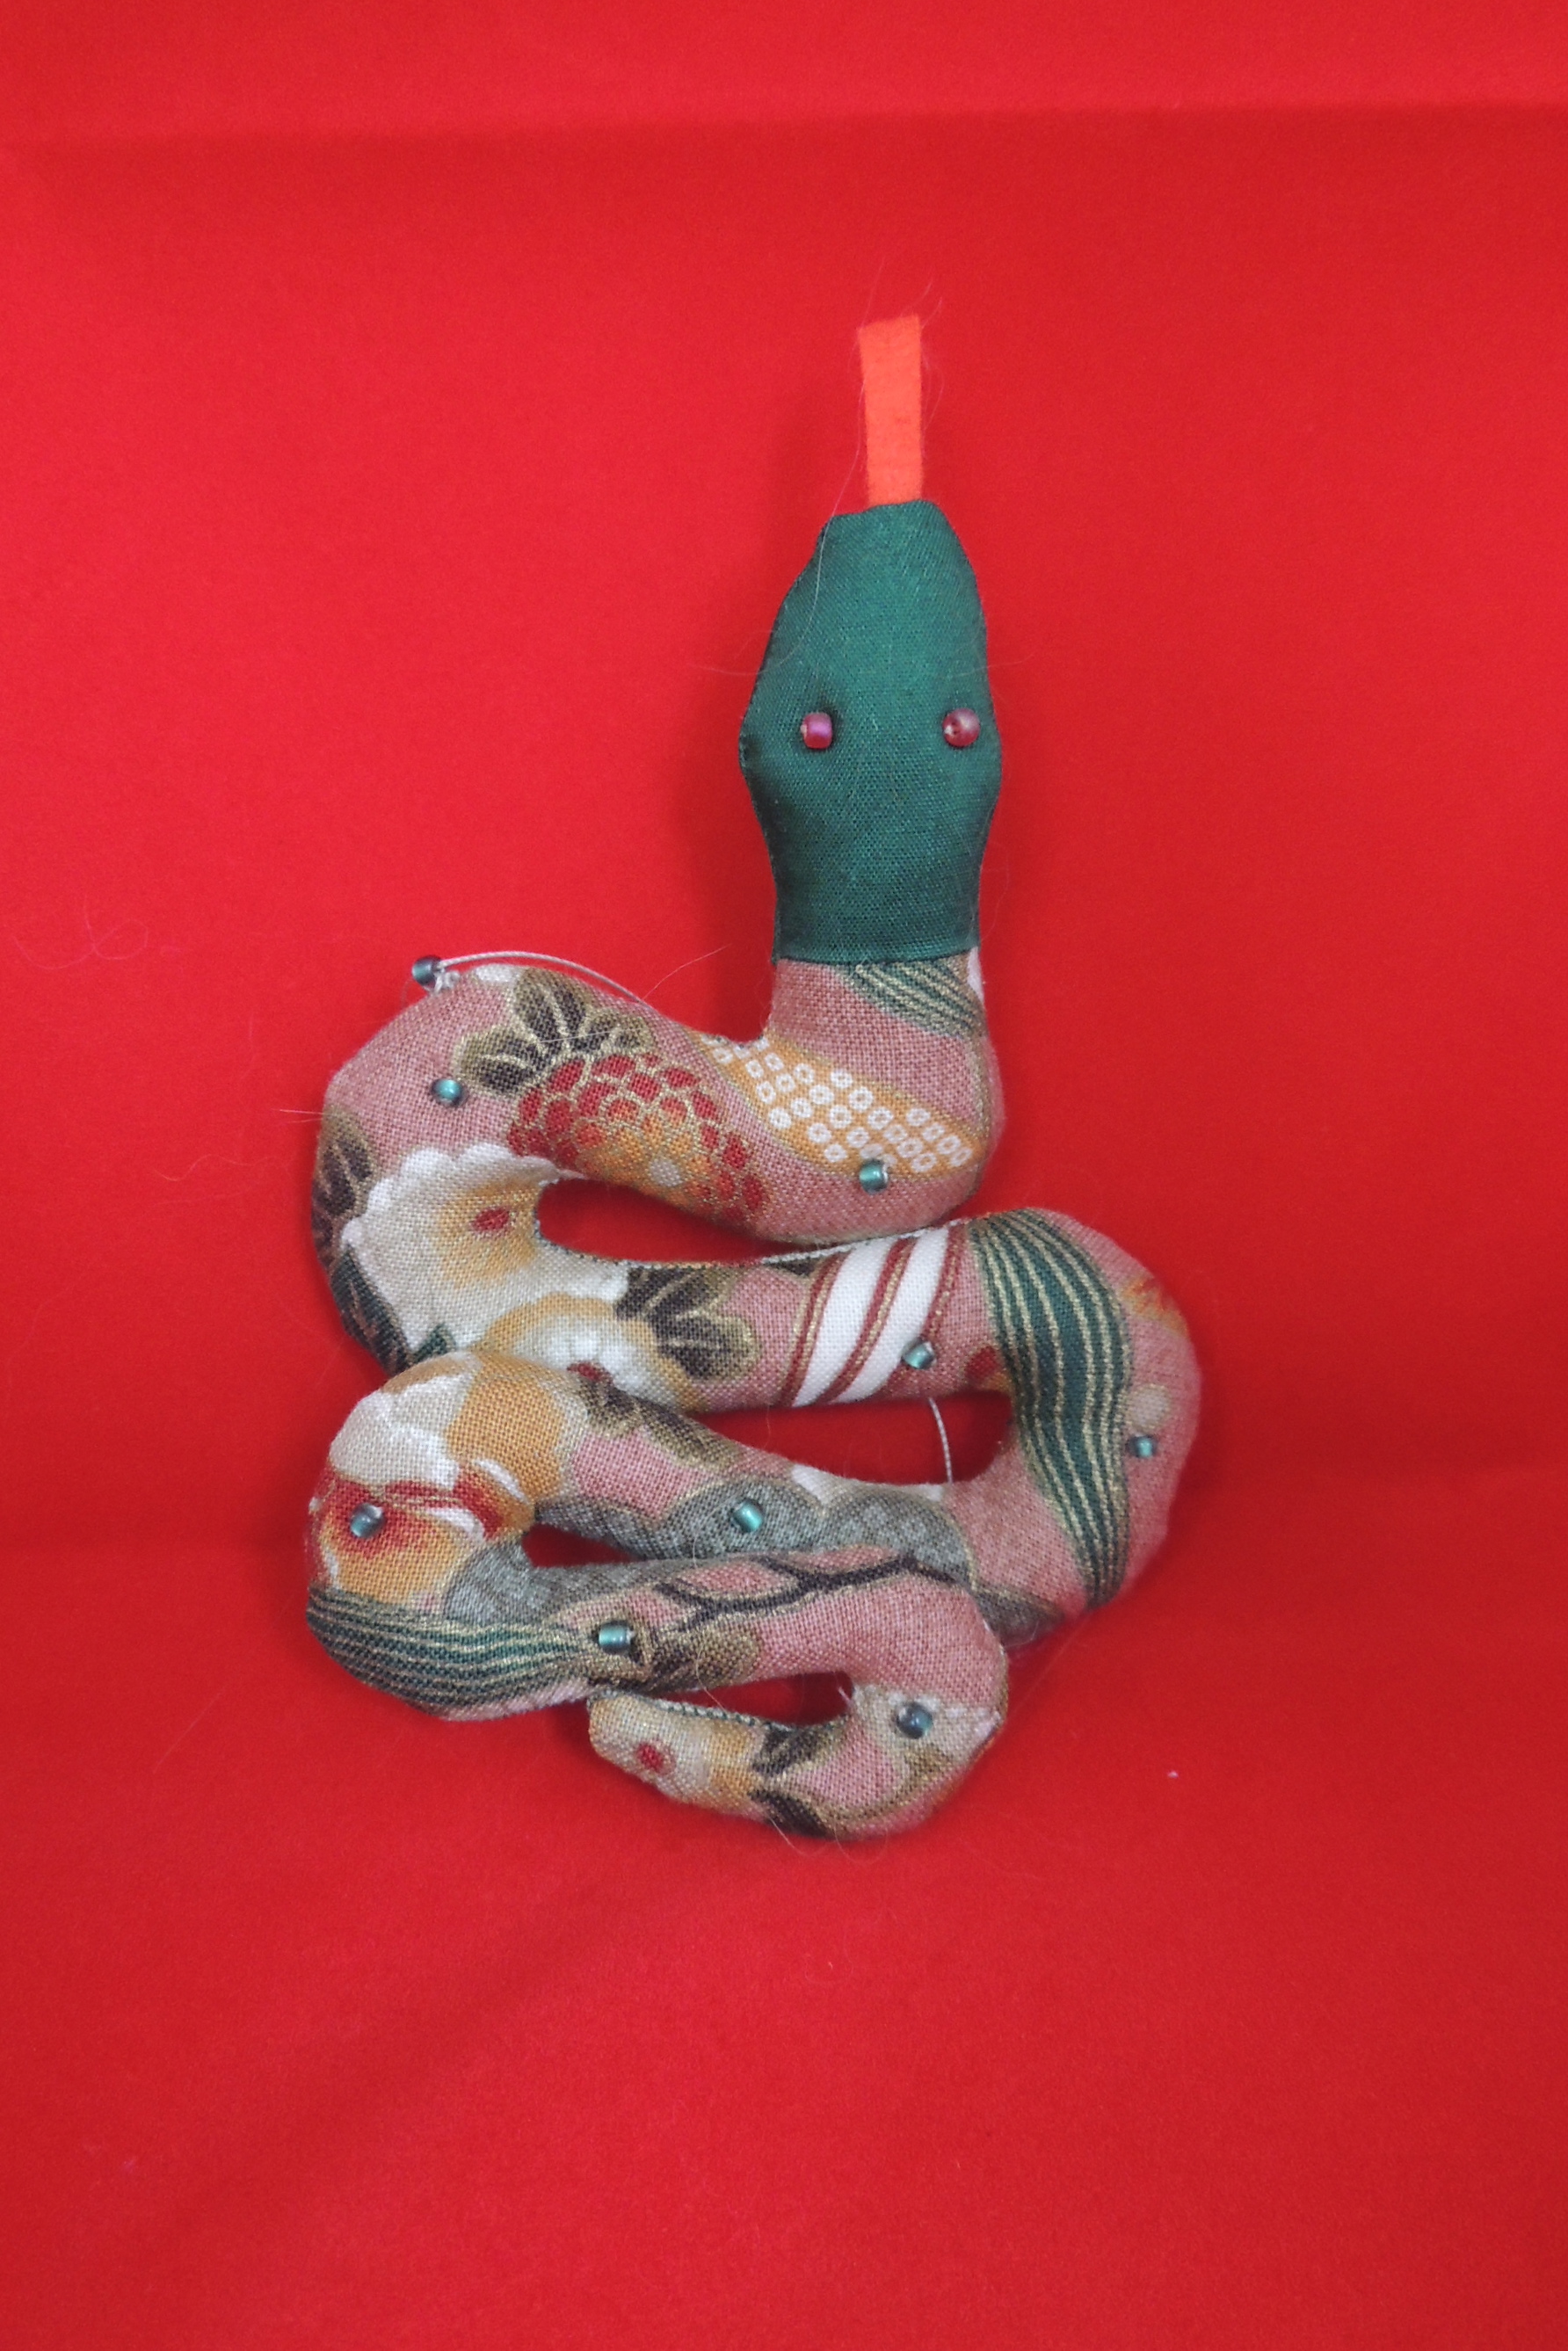 Ornament – Year of the Snake